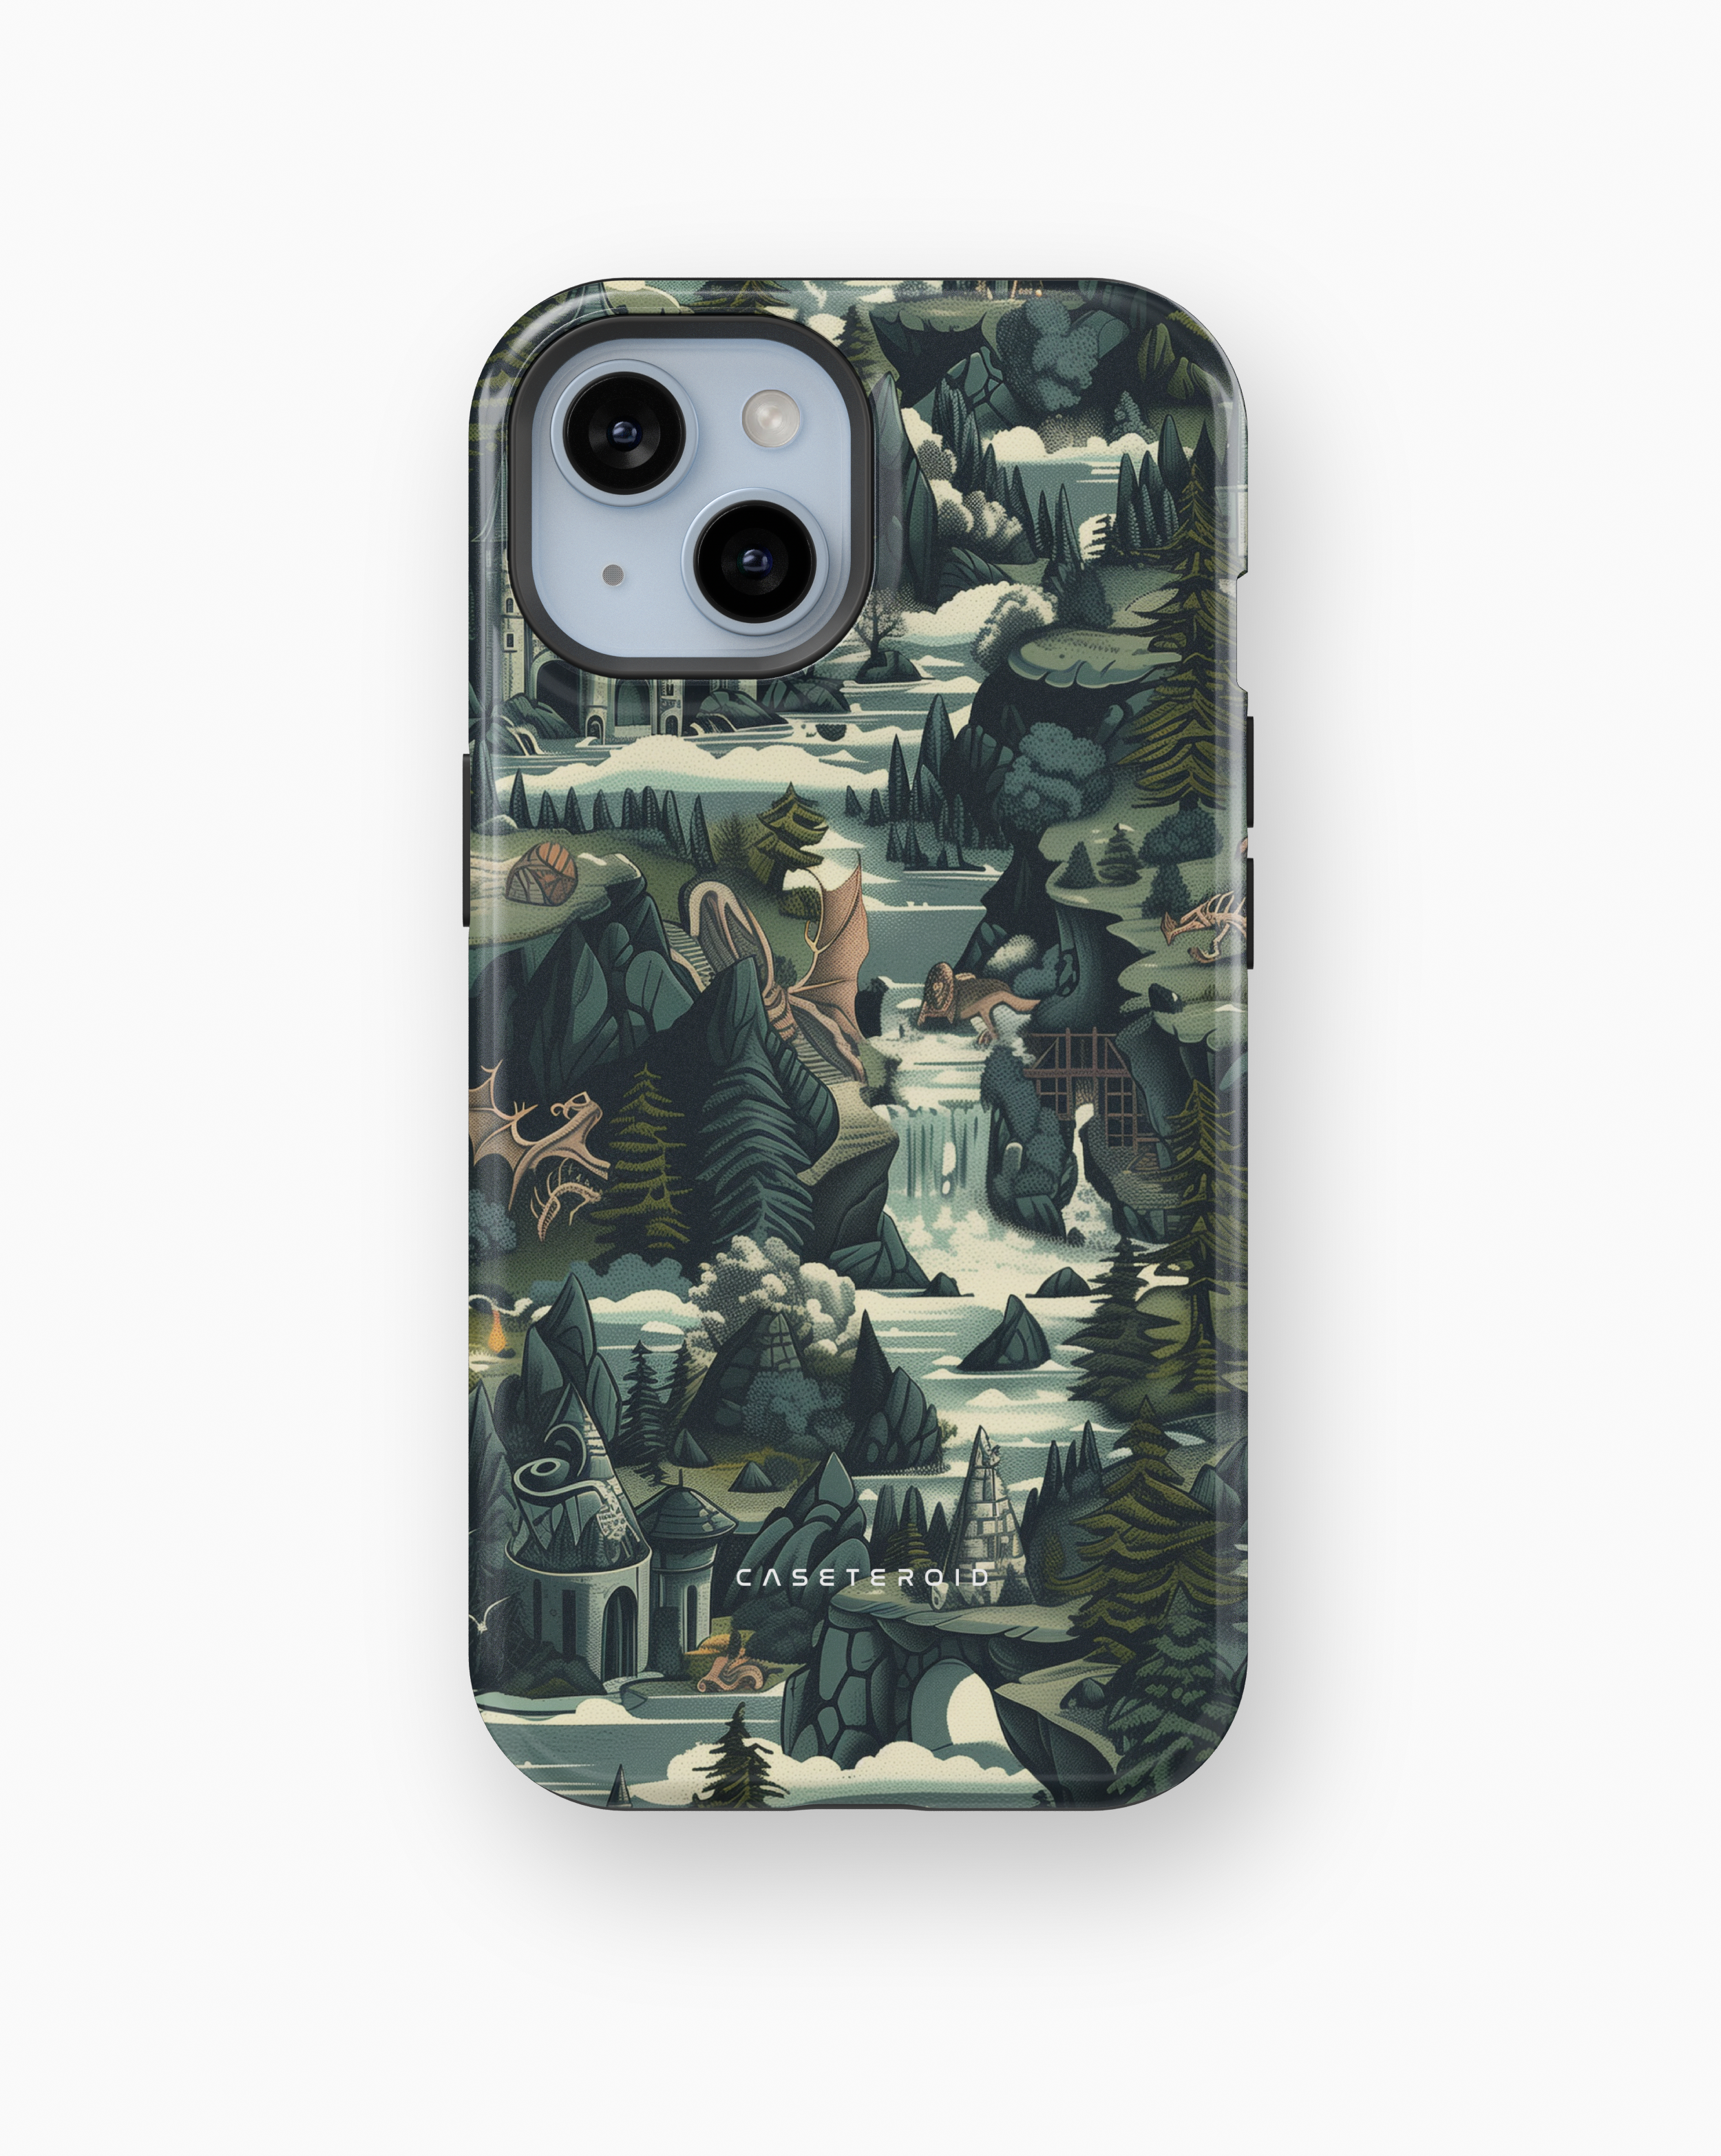 iPhone Tough Case - Mythical Kingdom Tapestry - CASETEROID